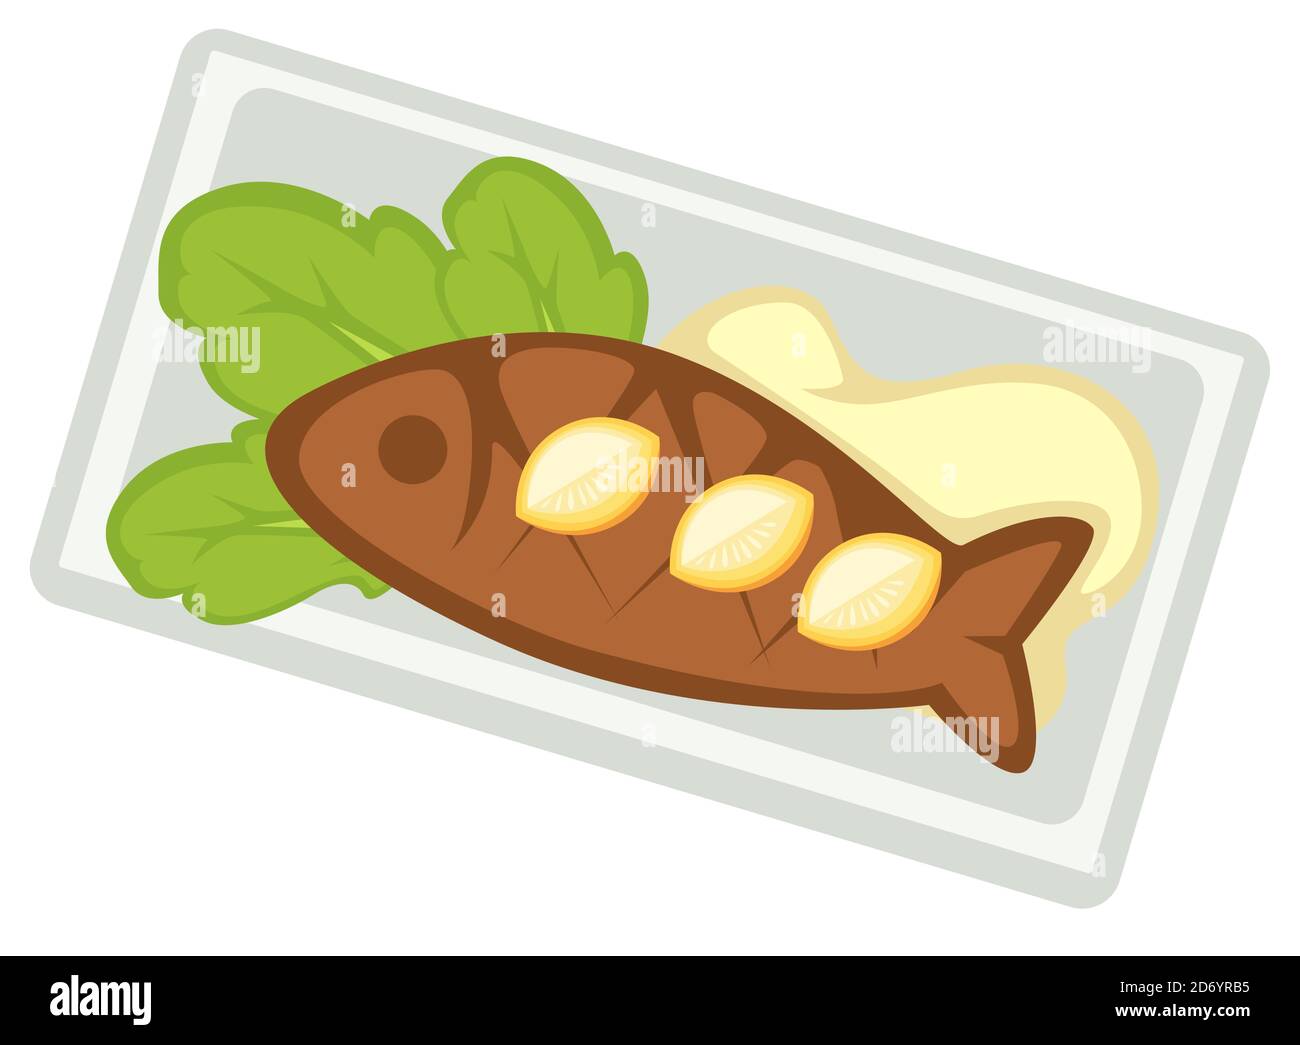 Seafood in restaurant fried or baked fish on plate Stock Vector